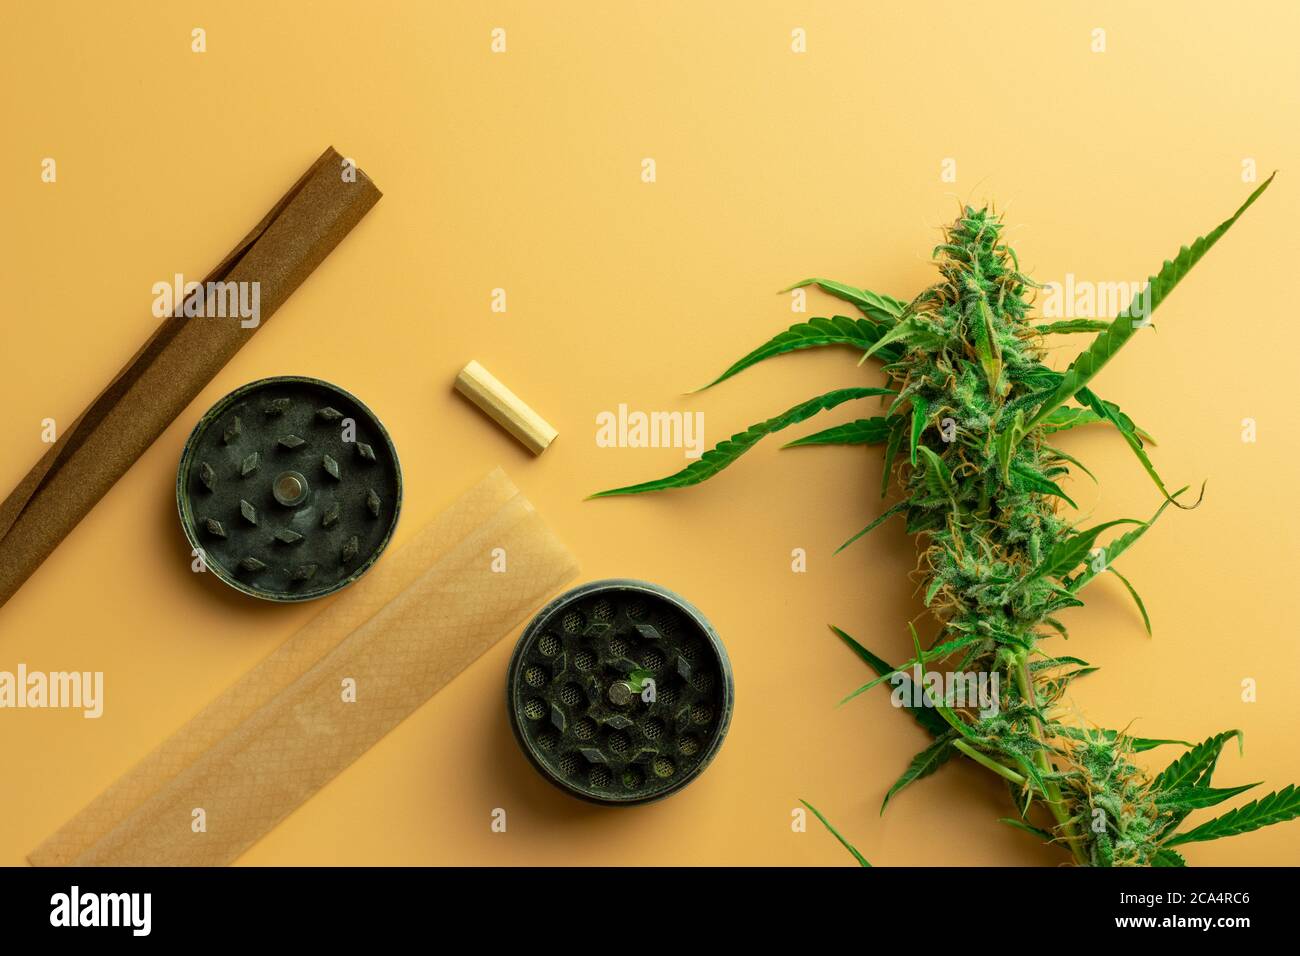 Cannabis and weed industry business. Marijuana accessories use concept. Grinder, paper and blunt with hemp bud on desk Stock Photo